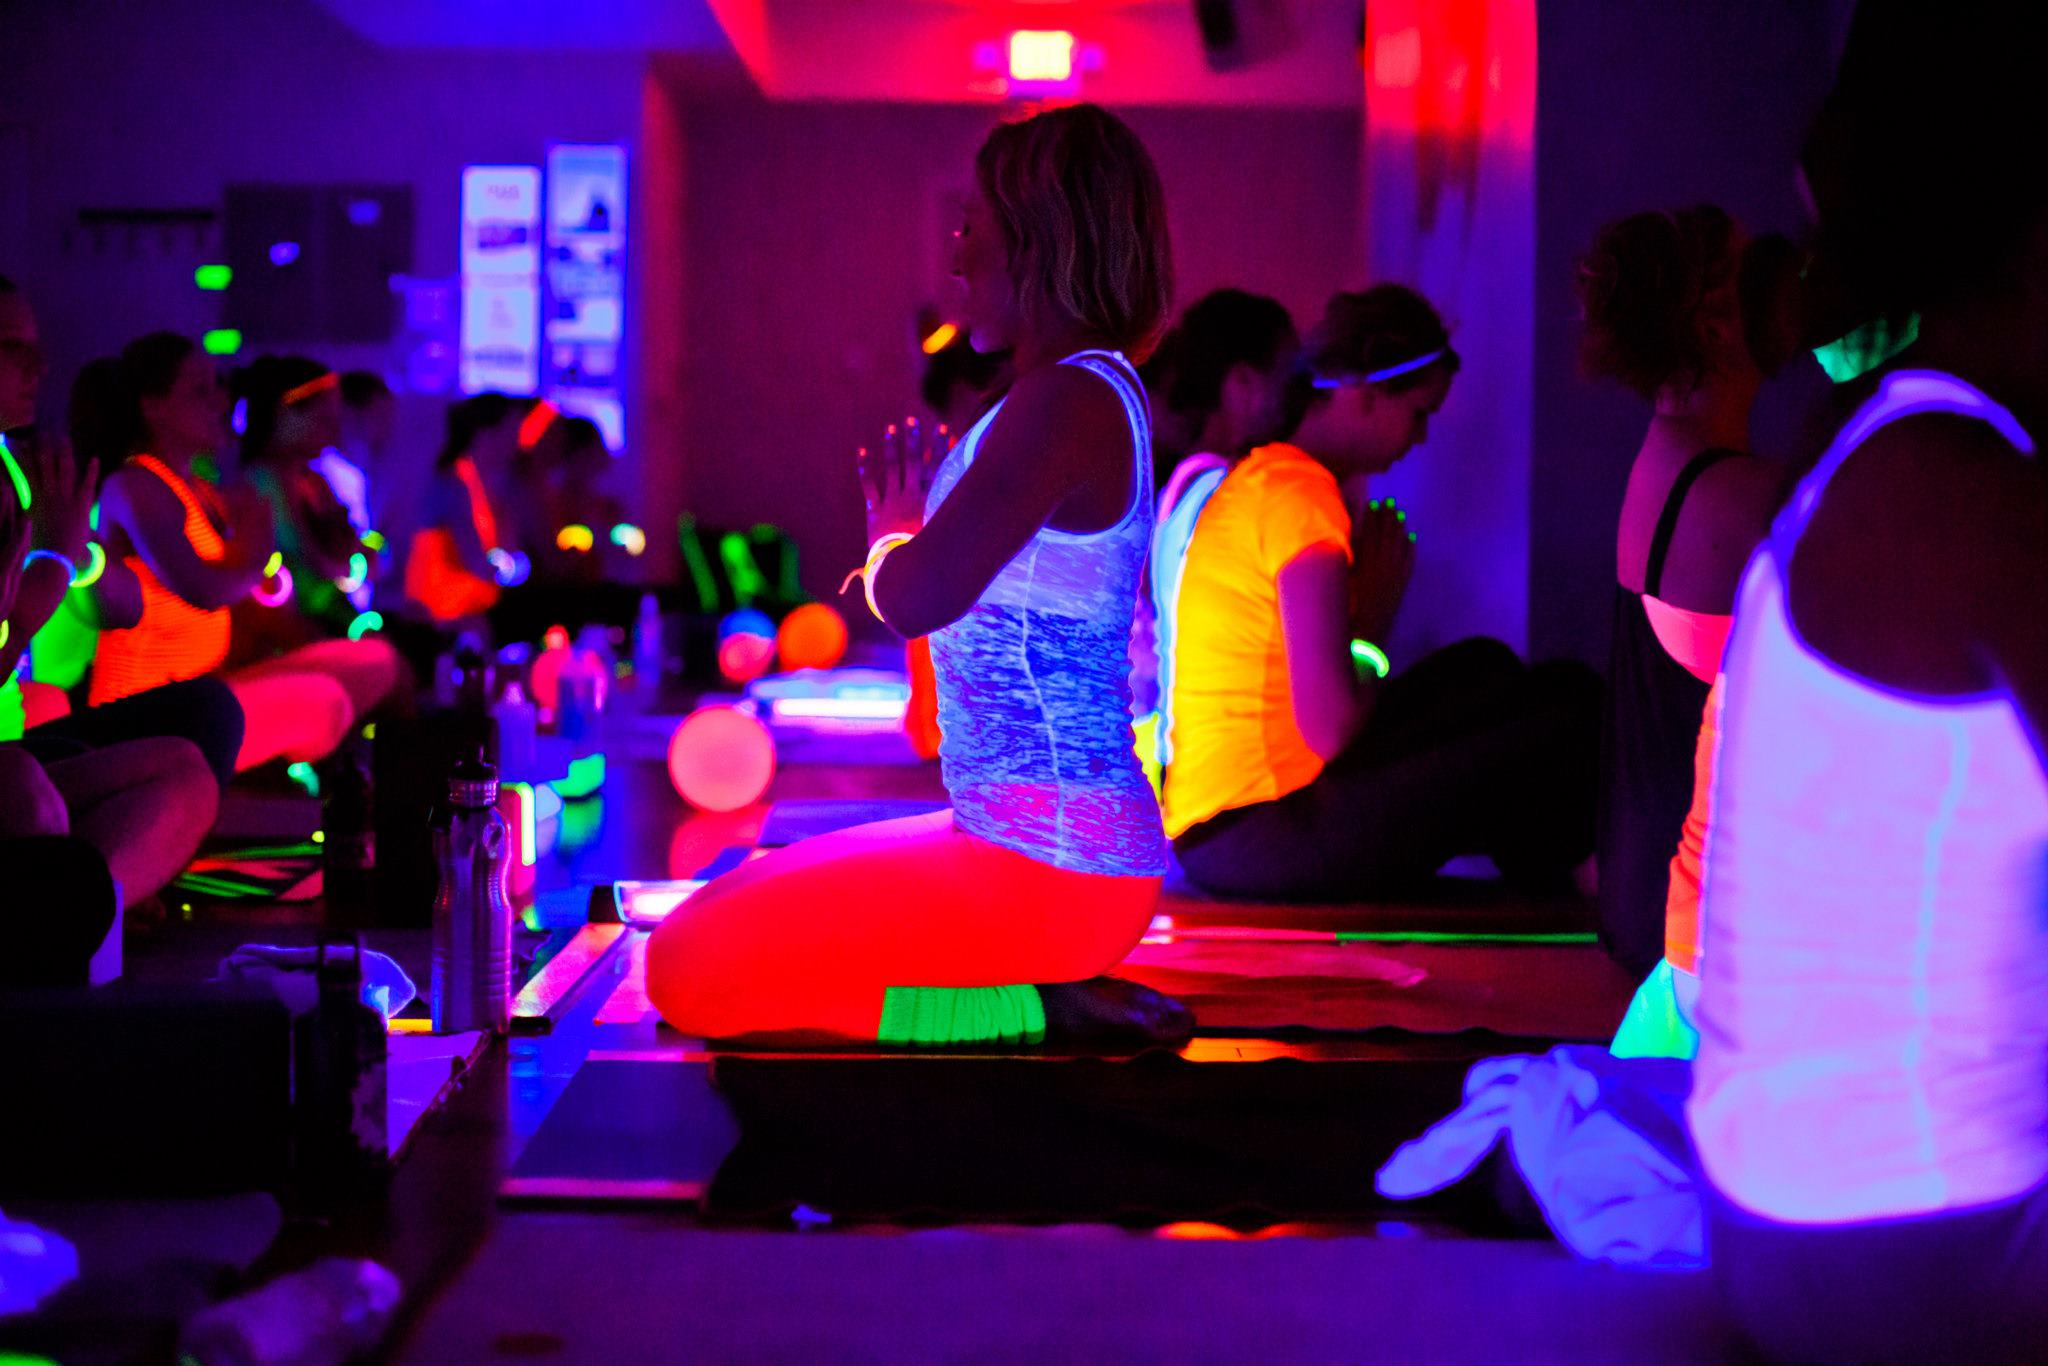 Yoga Instructor Leading Yoga Class in Dark Class with Glow in the Dark Clothing